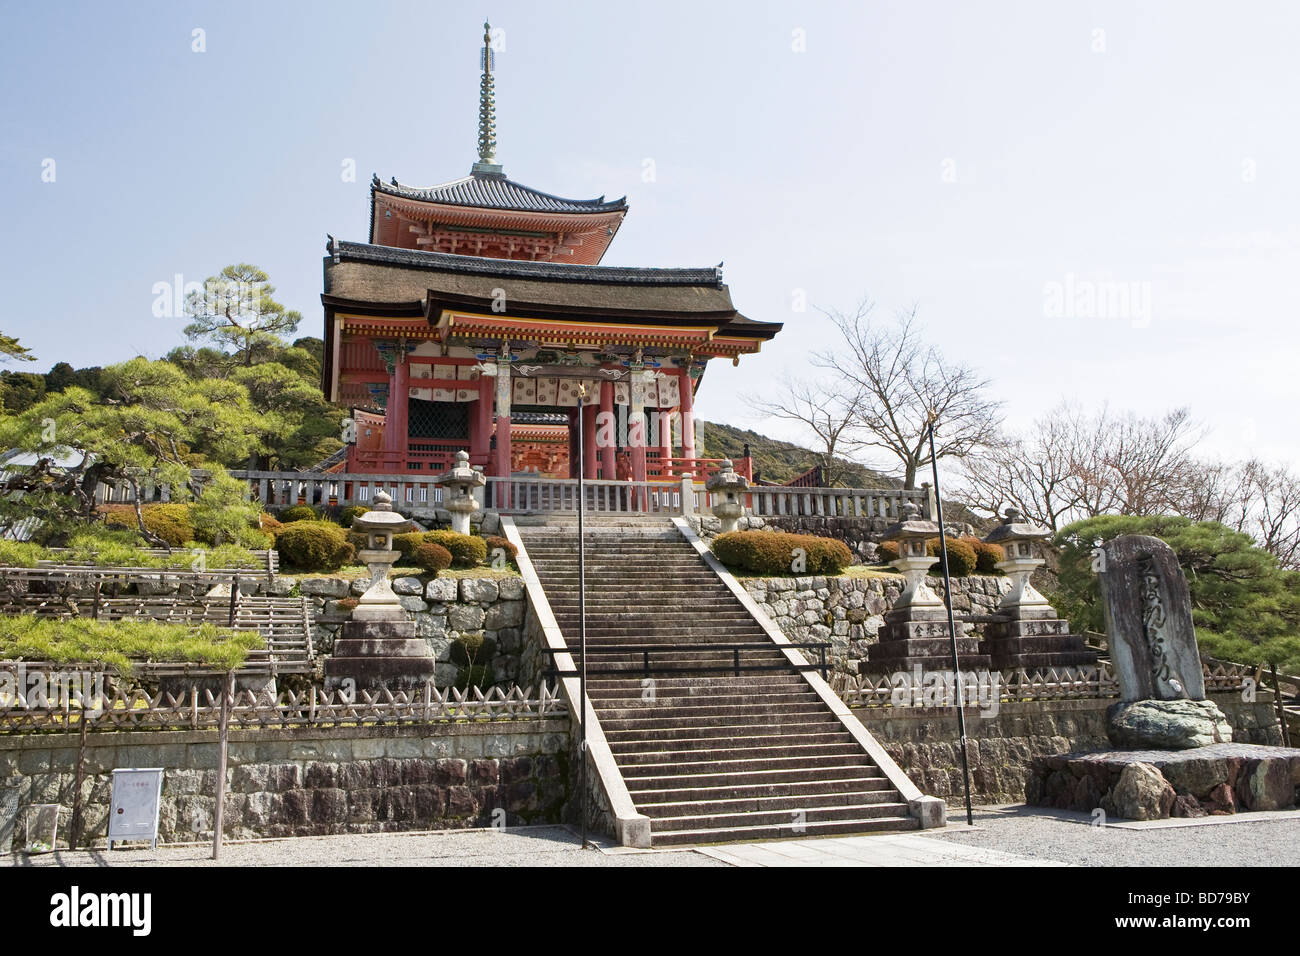 Fairytopia Shrine-in-the-kiyomizudera-pure-water-temple-complex-in-kyoto-japan-BD79BY